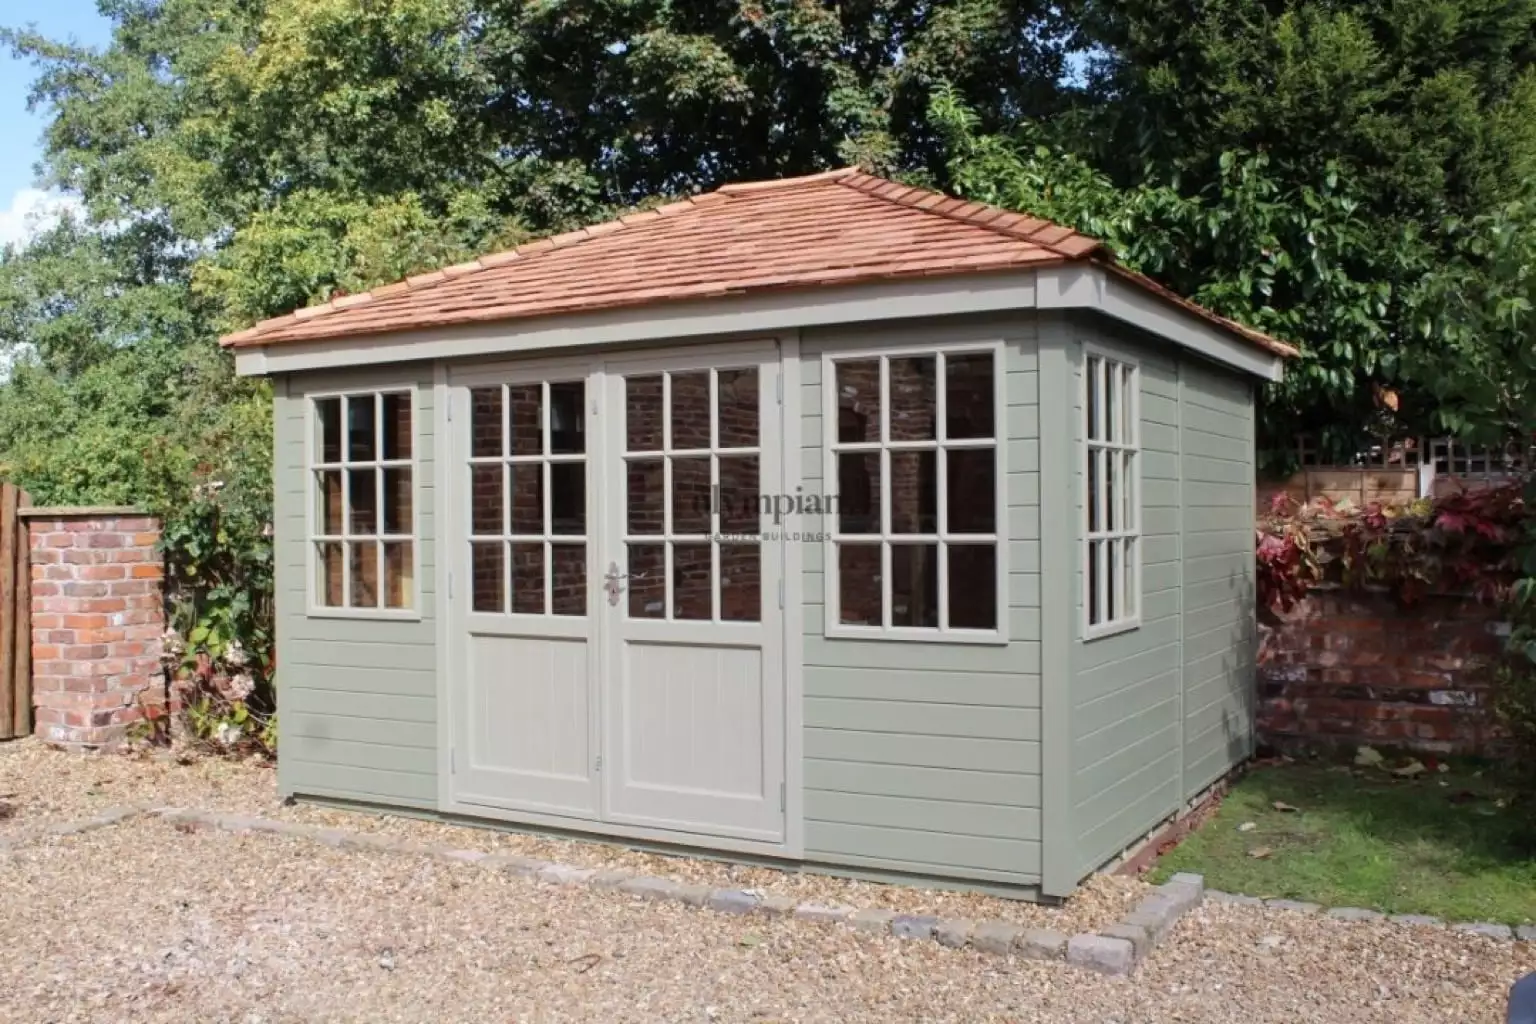 Painted hipped roof summerhouse with cedar shingles